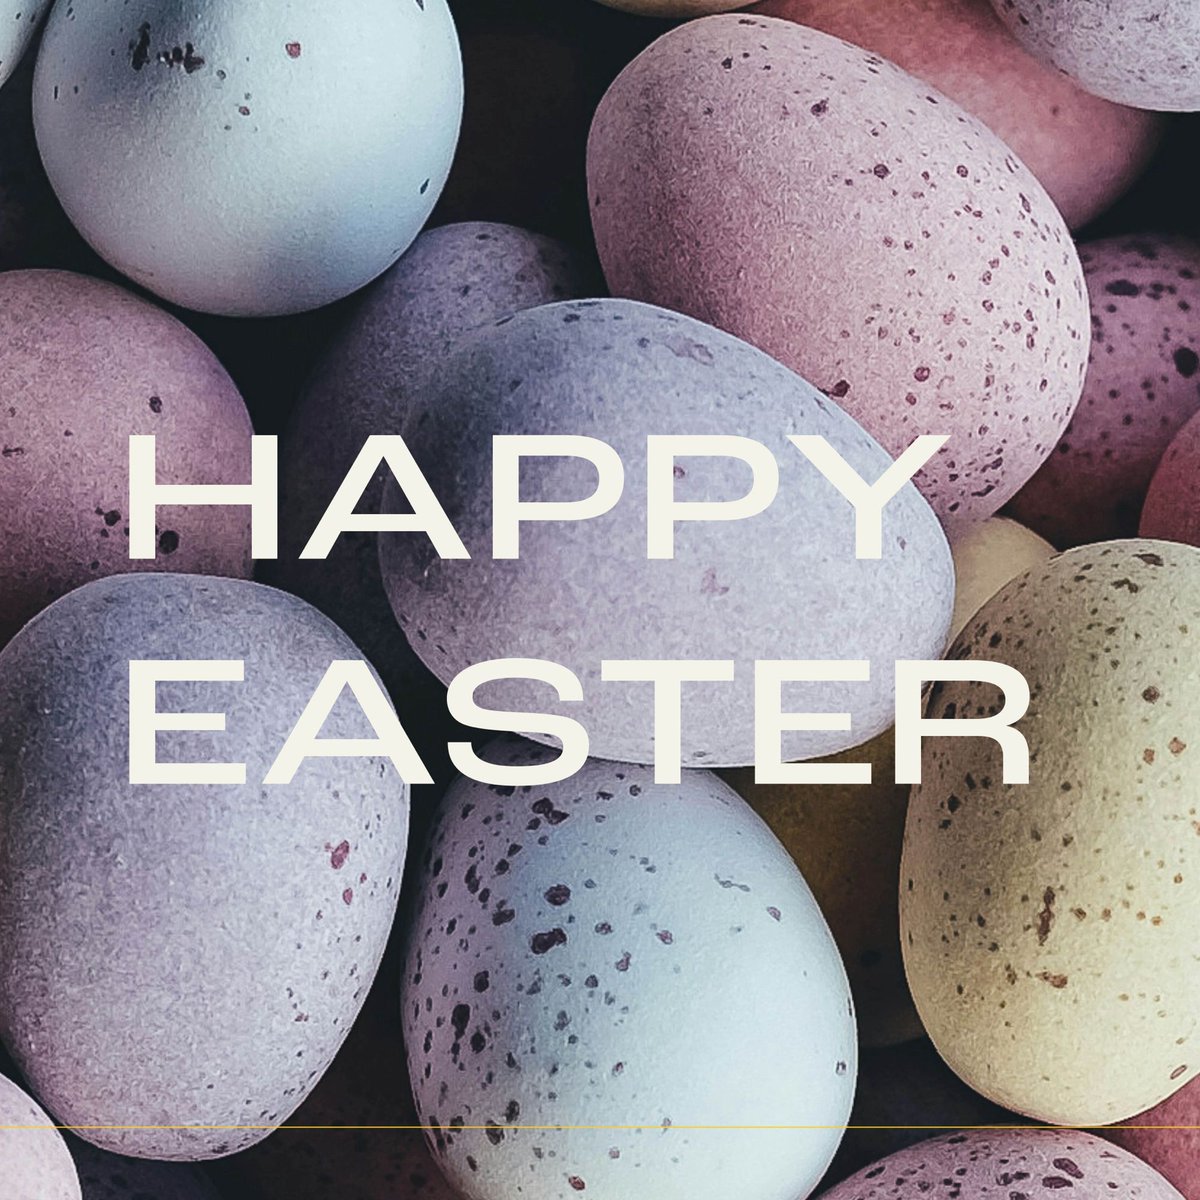 Today, we celebrate the promise of hope. Let's cherish the love of family and friends. May this Easter fill your heart with joy and your home with peace. Wishing you a day filled with colorful eggs, sweet treats, and beautiful moments. Have a wonderful Easter Sunday! #HappyEaster